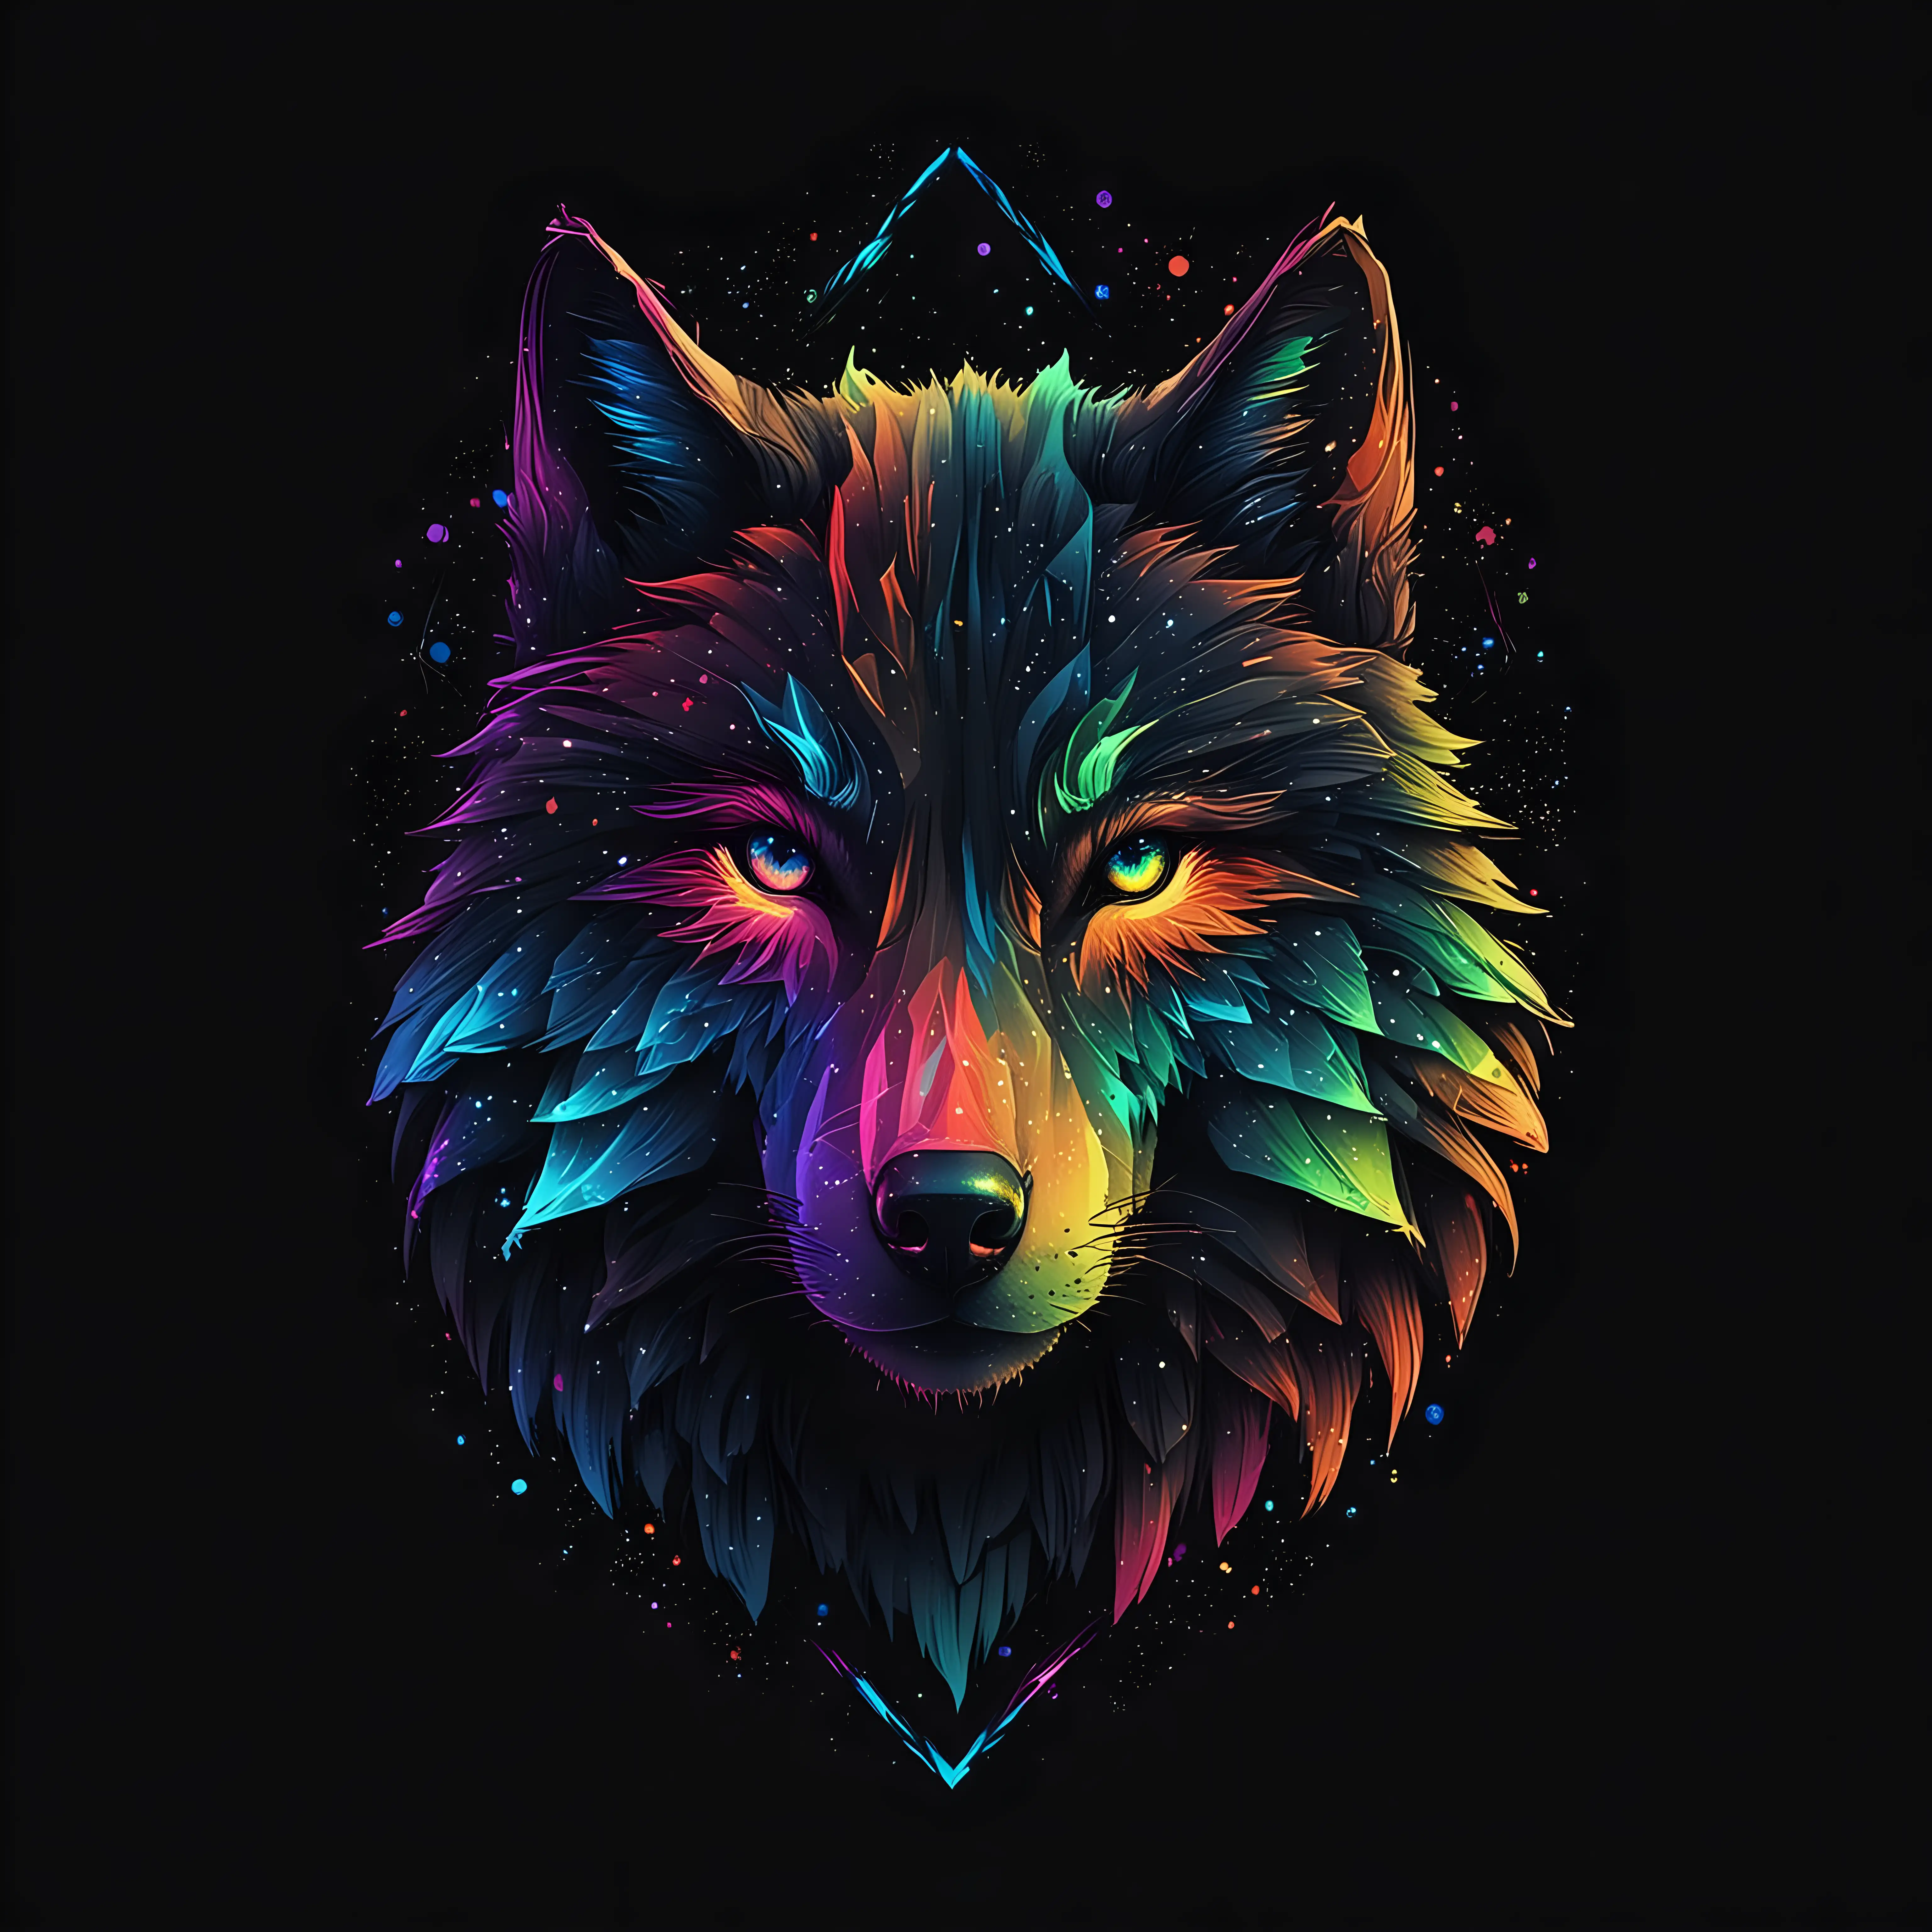 logo wolf simple lines polygon face northern lights colorful digital art dreamy trippy black background 1920x1080p